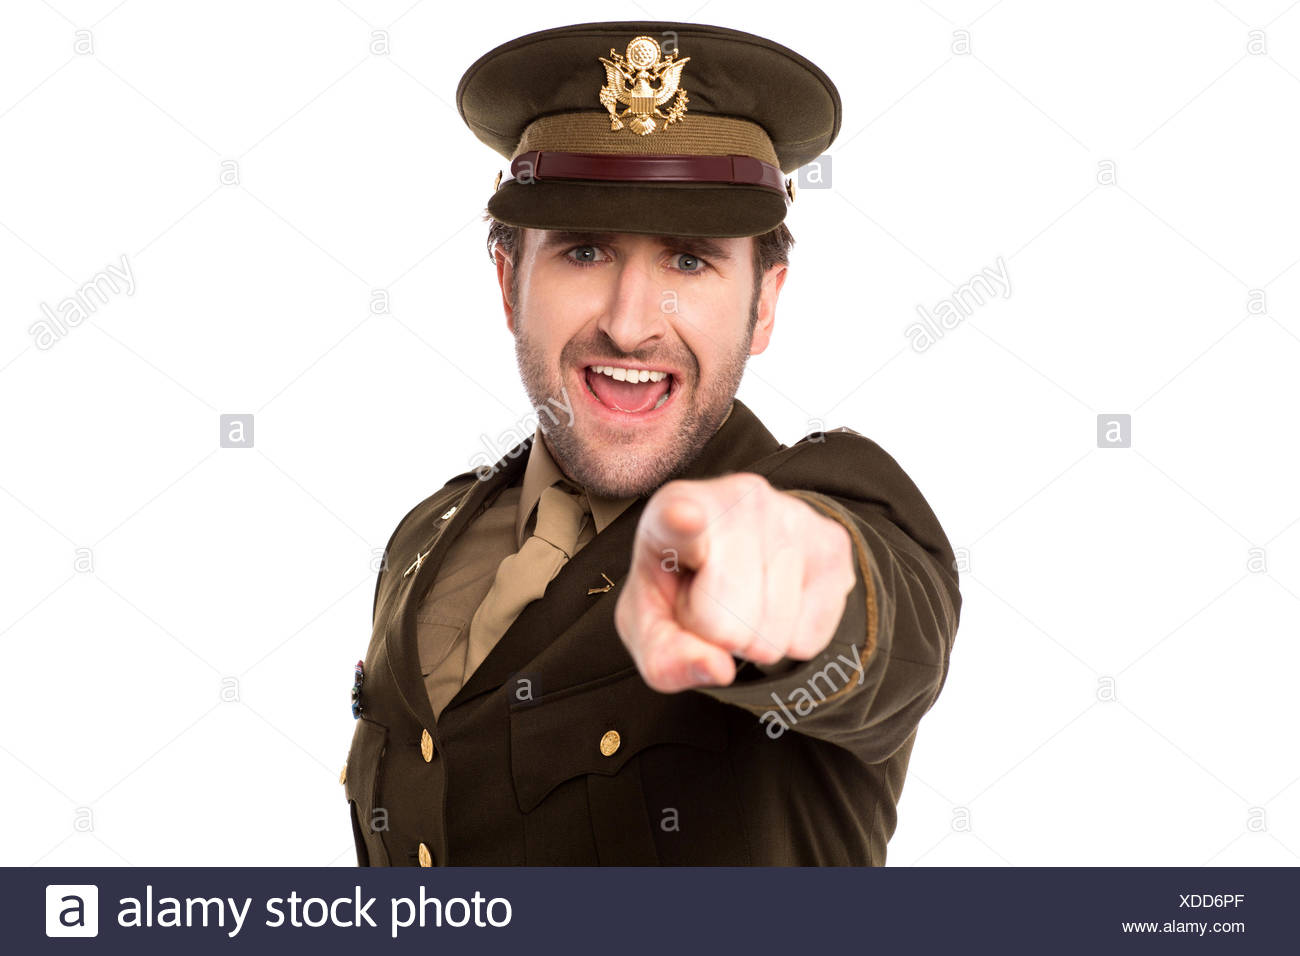 Soldier Pointing Finger Stock Photos & Soldier Pointing Finger Stock ...